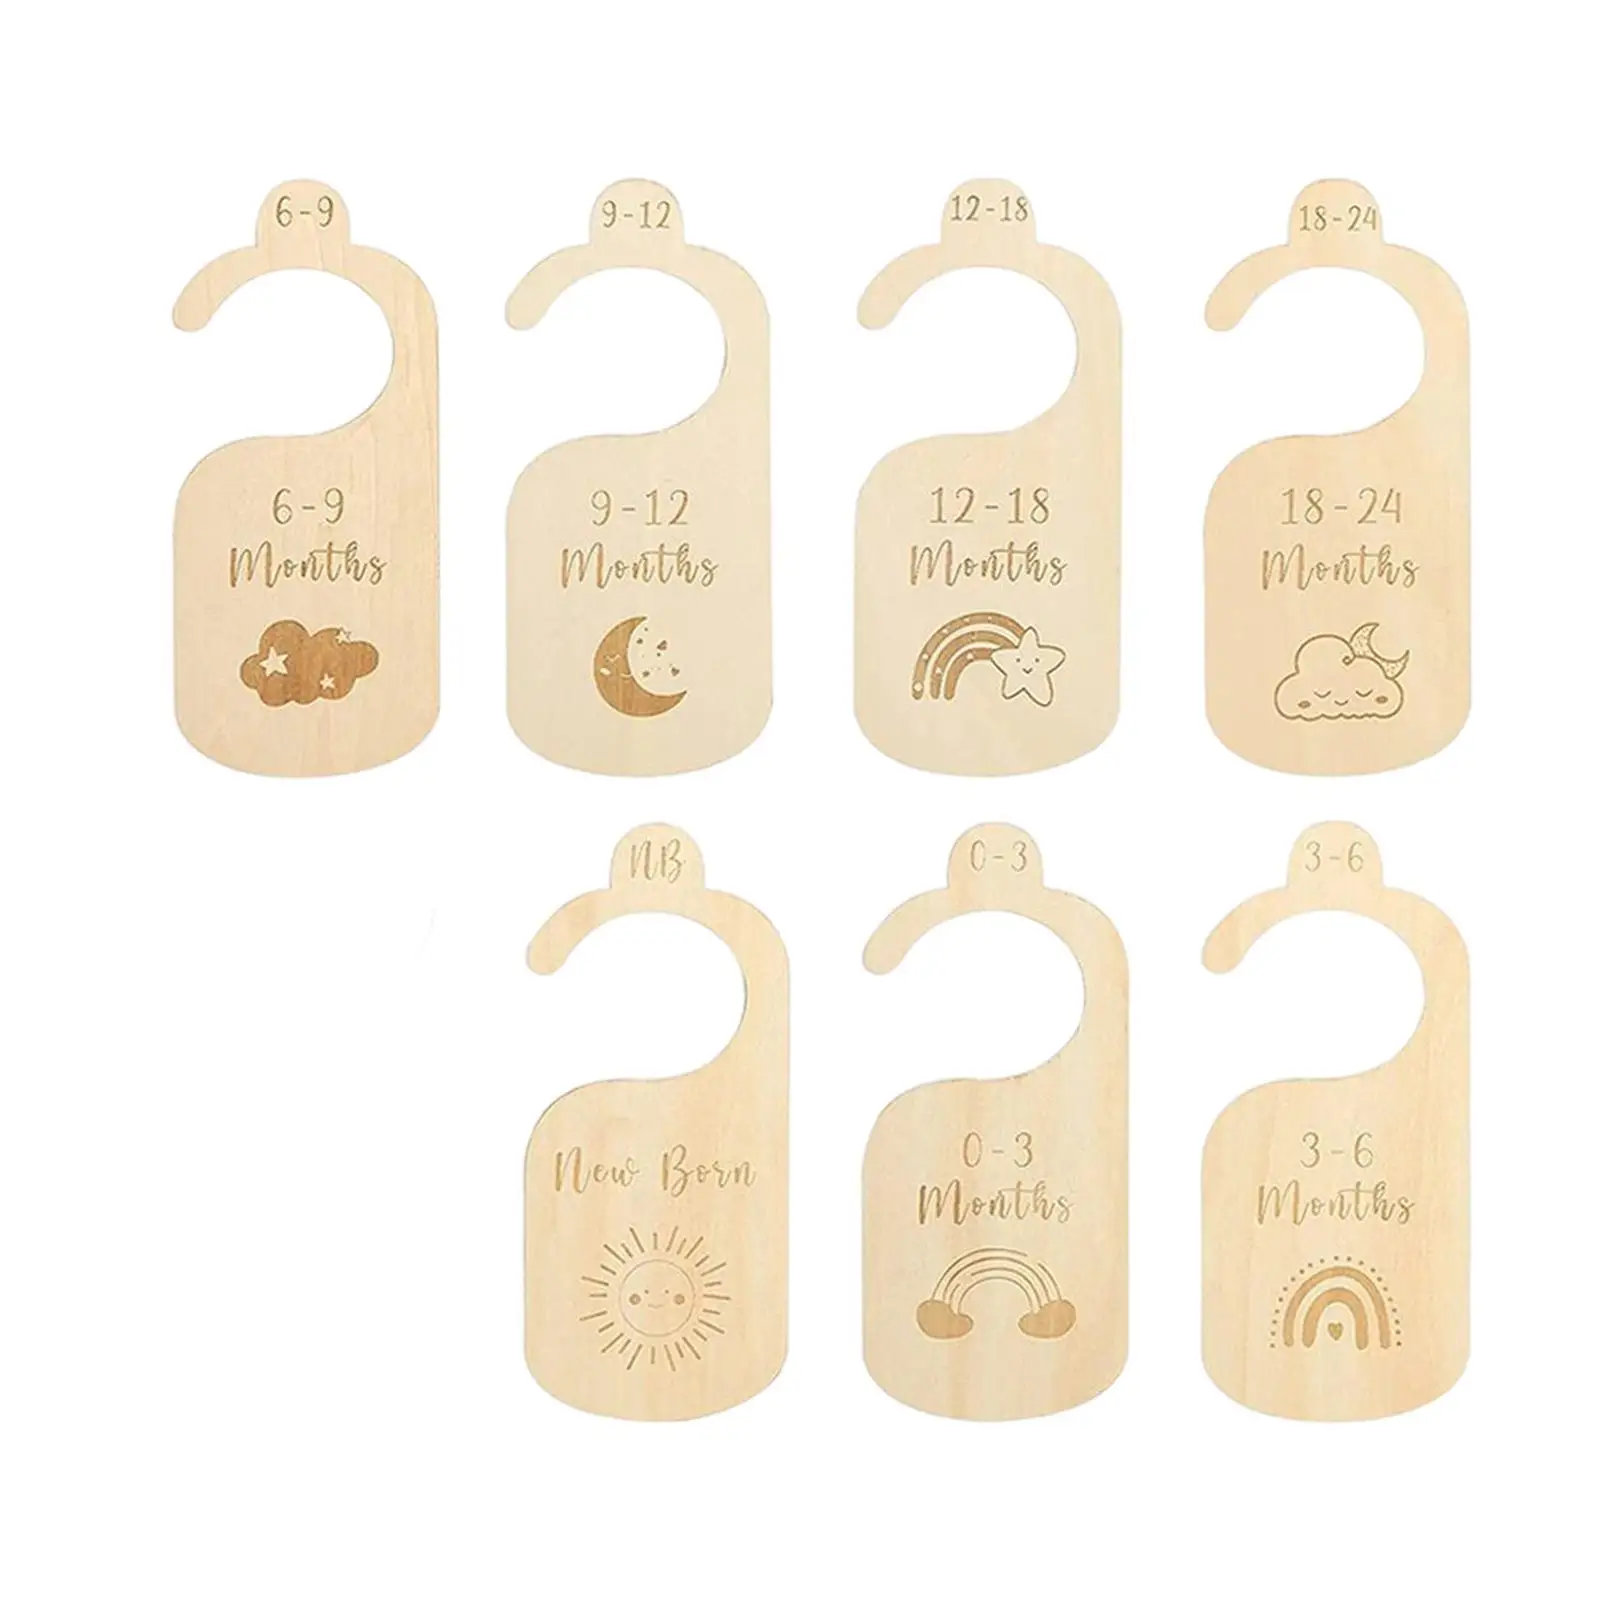 7 Pieces Double Sided Baby Closet Dividers Nursery Clothes Organizers Infant Wardrobe Divider Label New Mom Gift